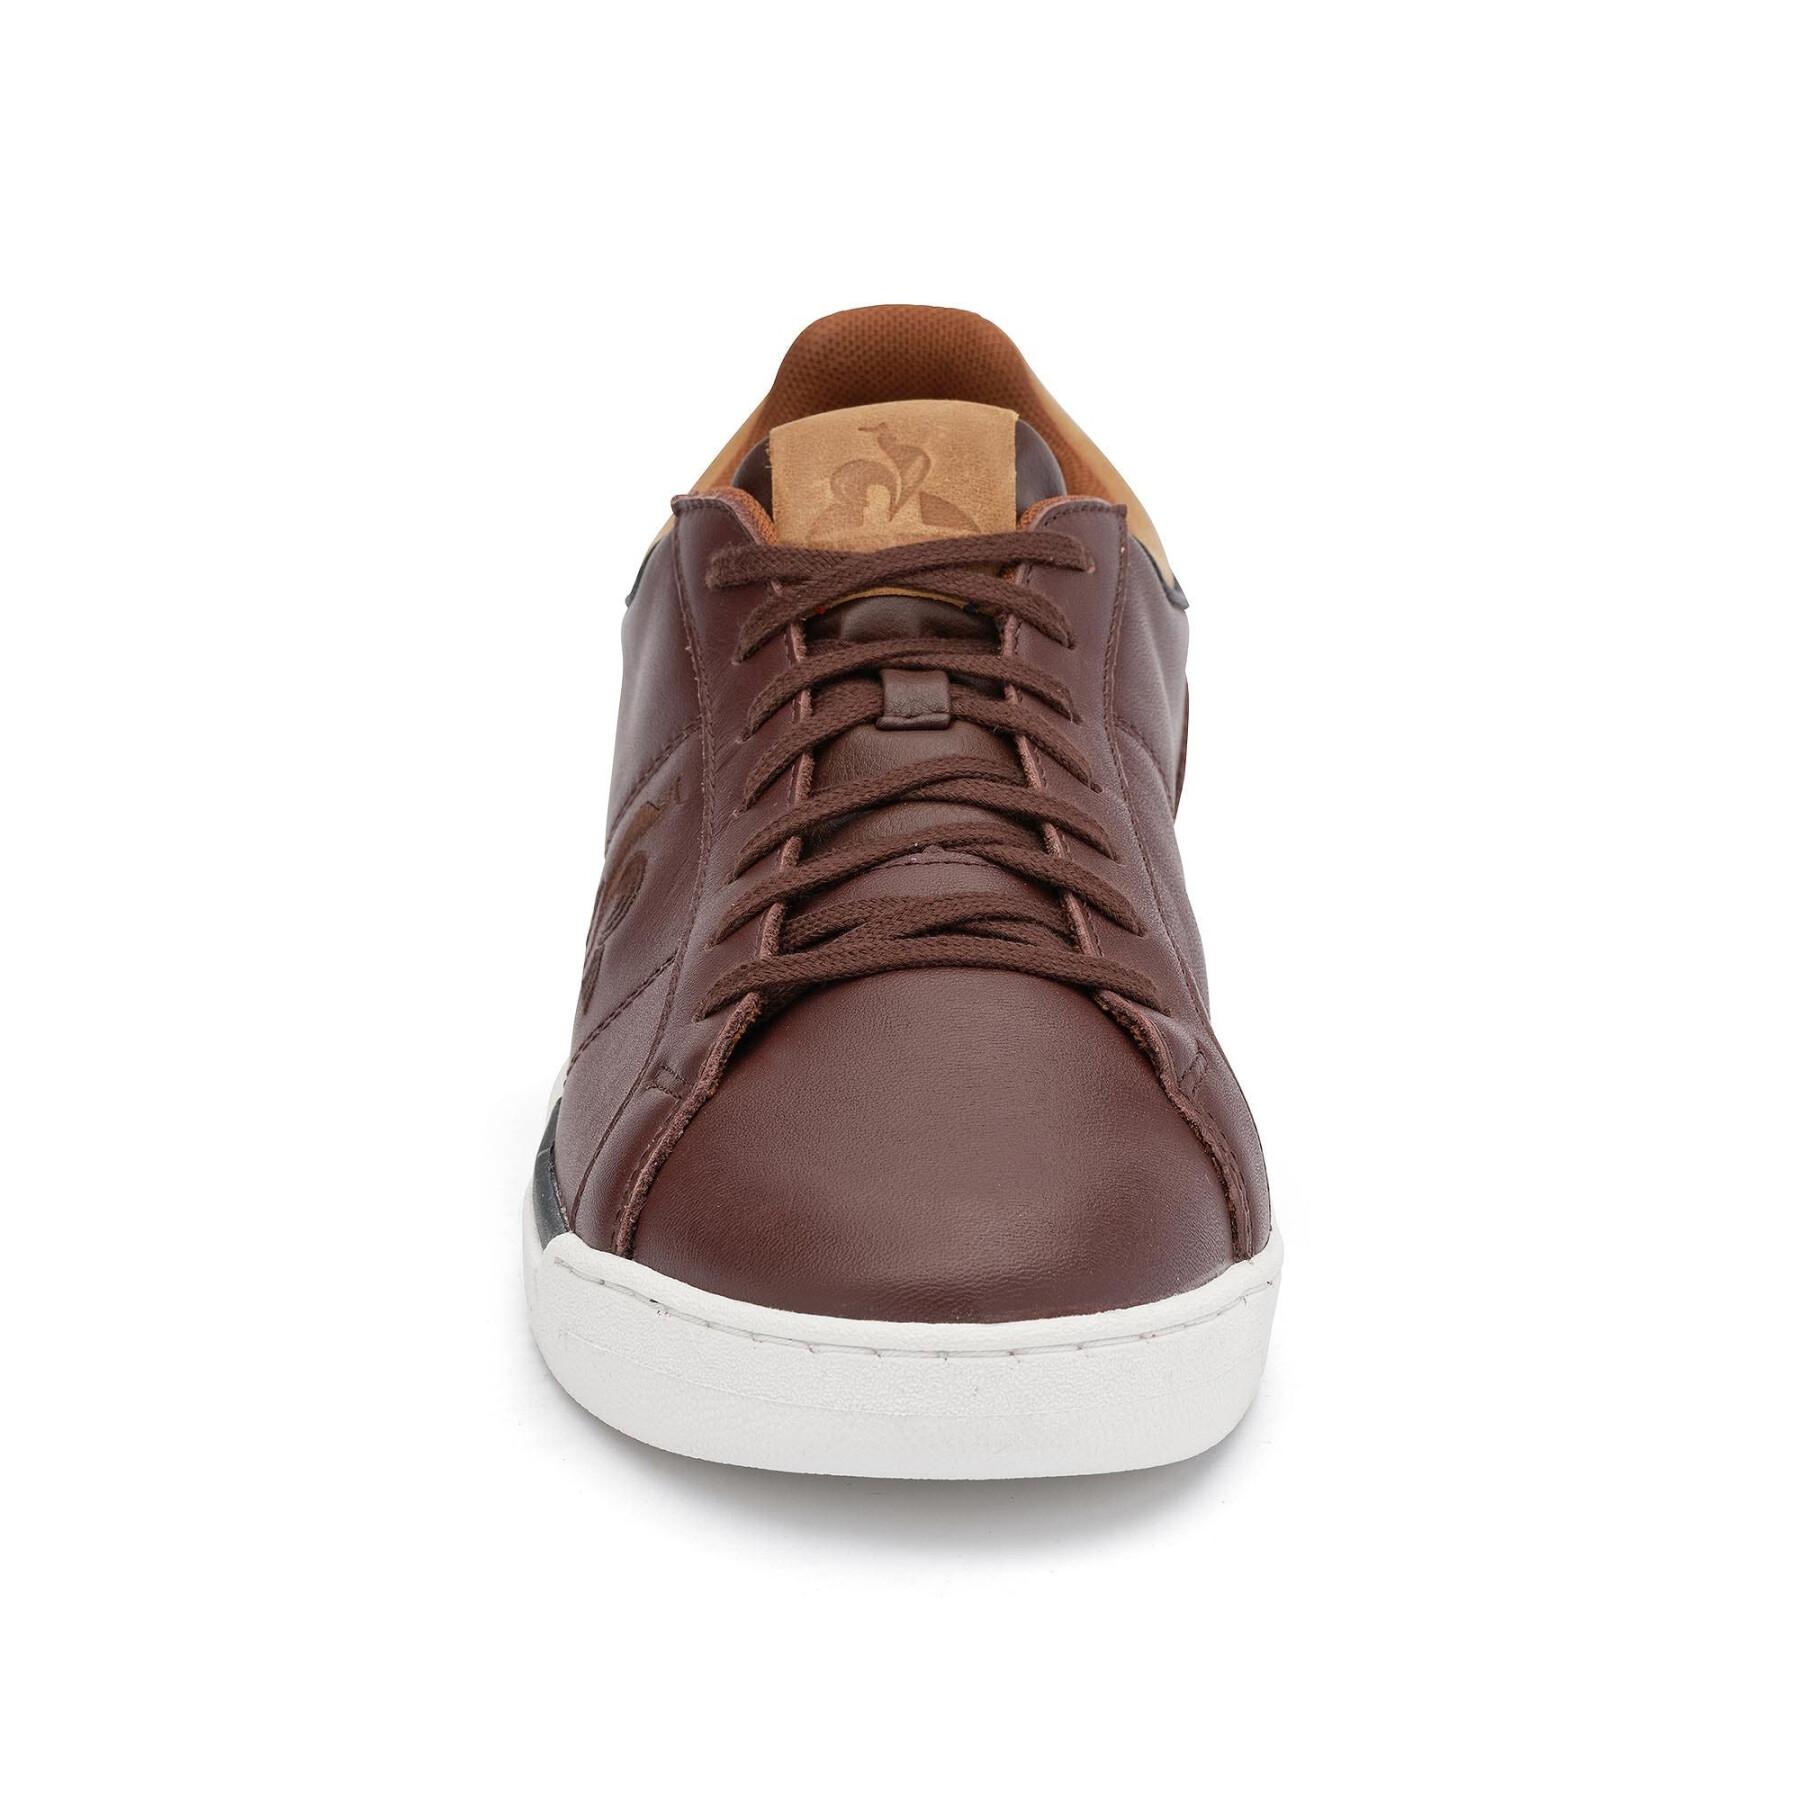 Formadores Le Coq Sportif Stadium Leather Mix